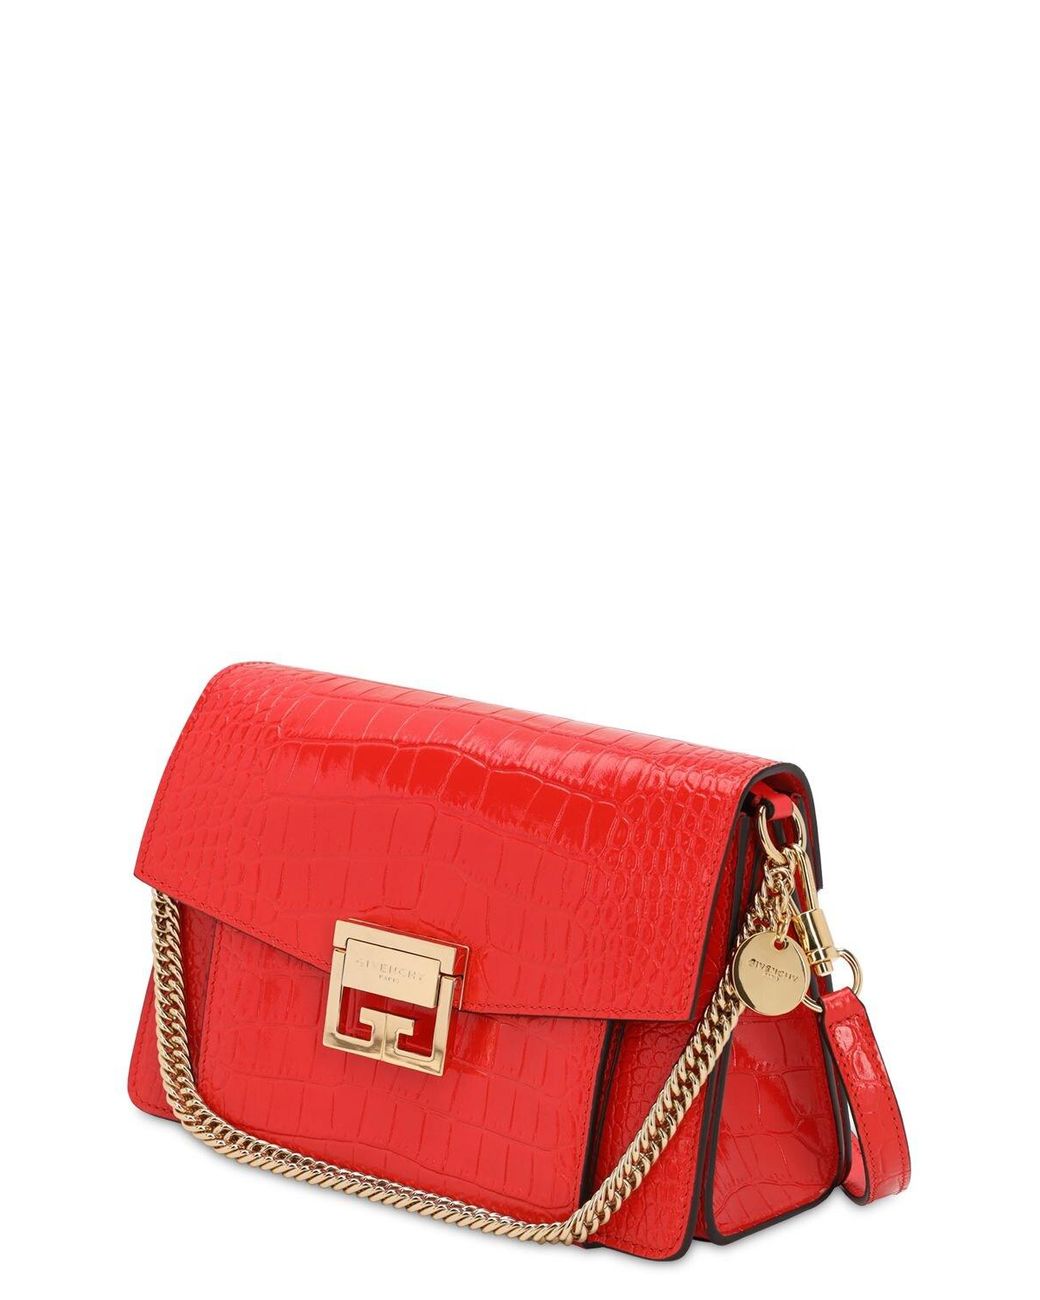 Givenchy Small Gv3 Croc Embossed Leather Bag in Red | Lyst